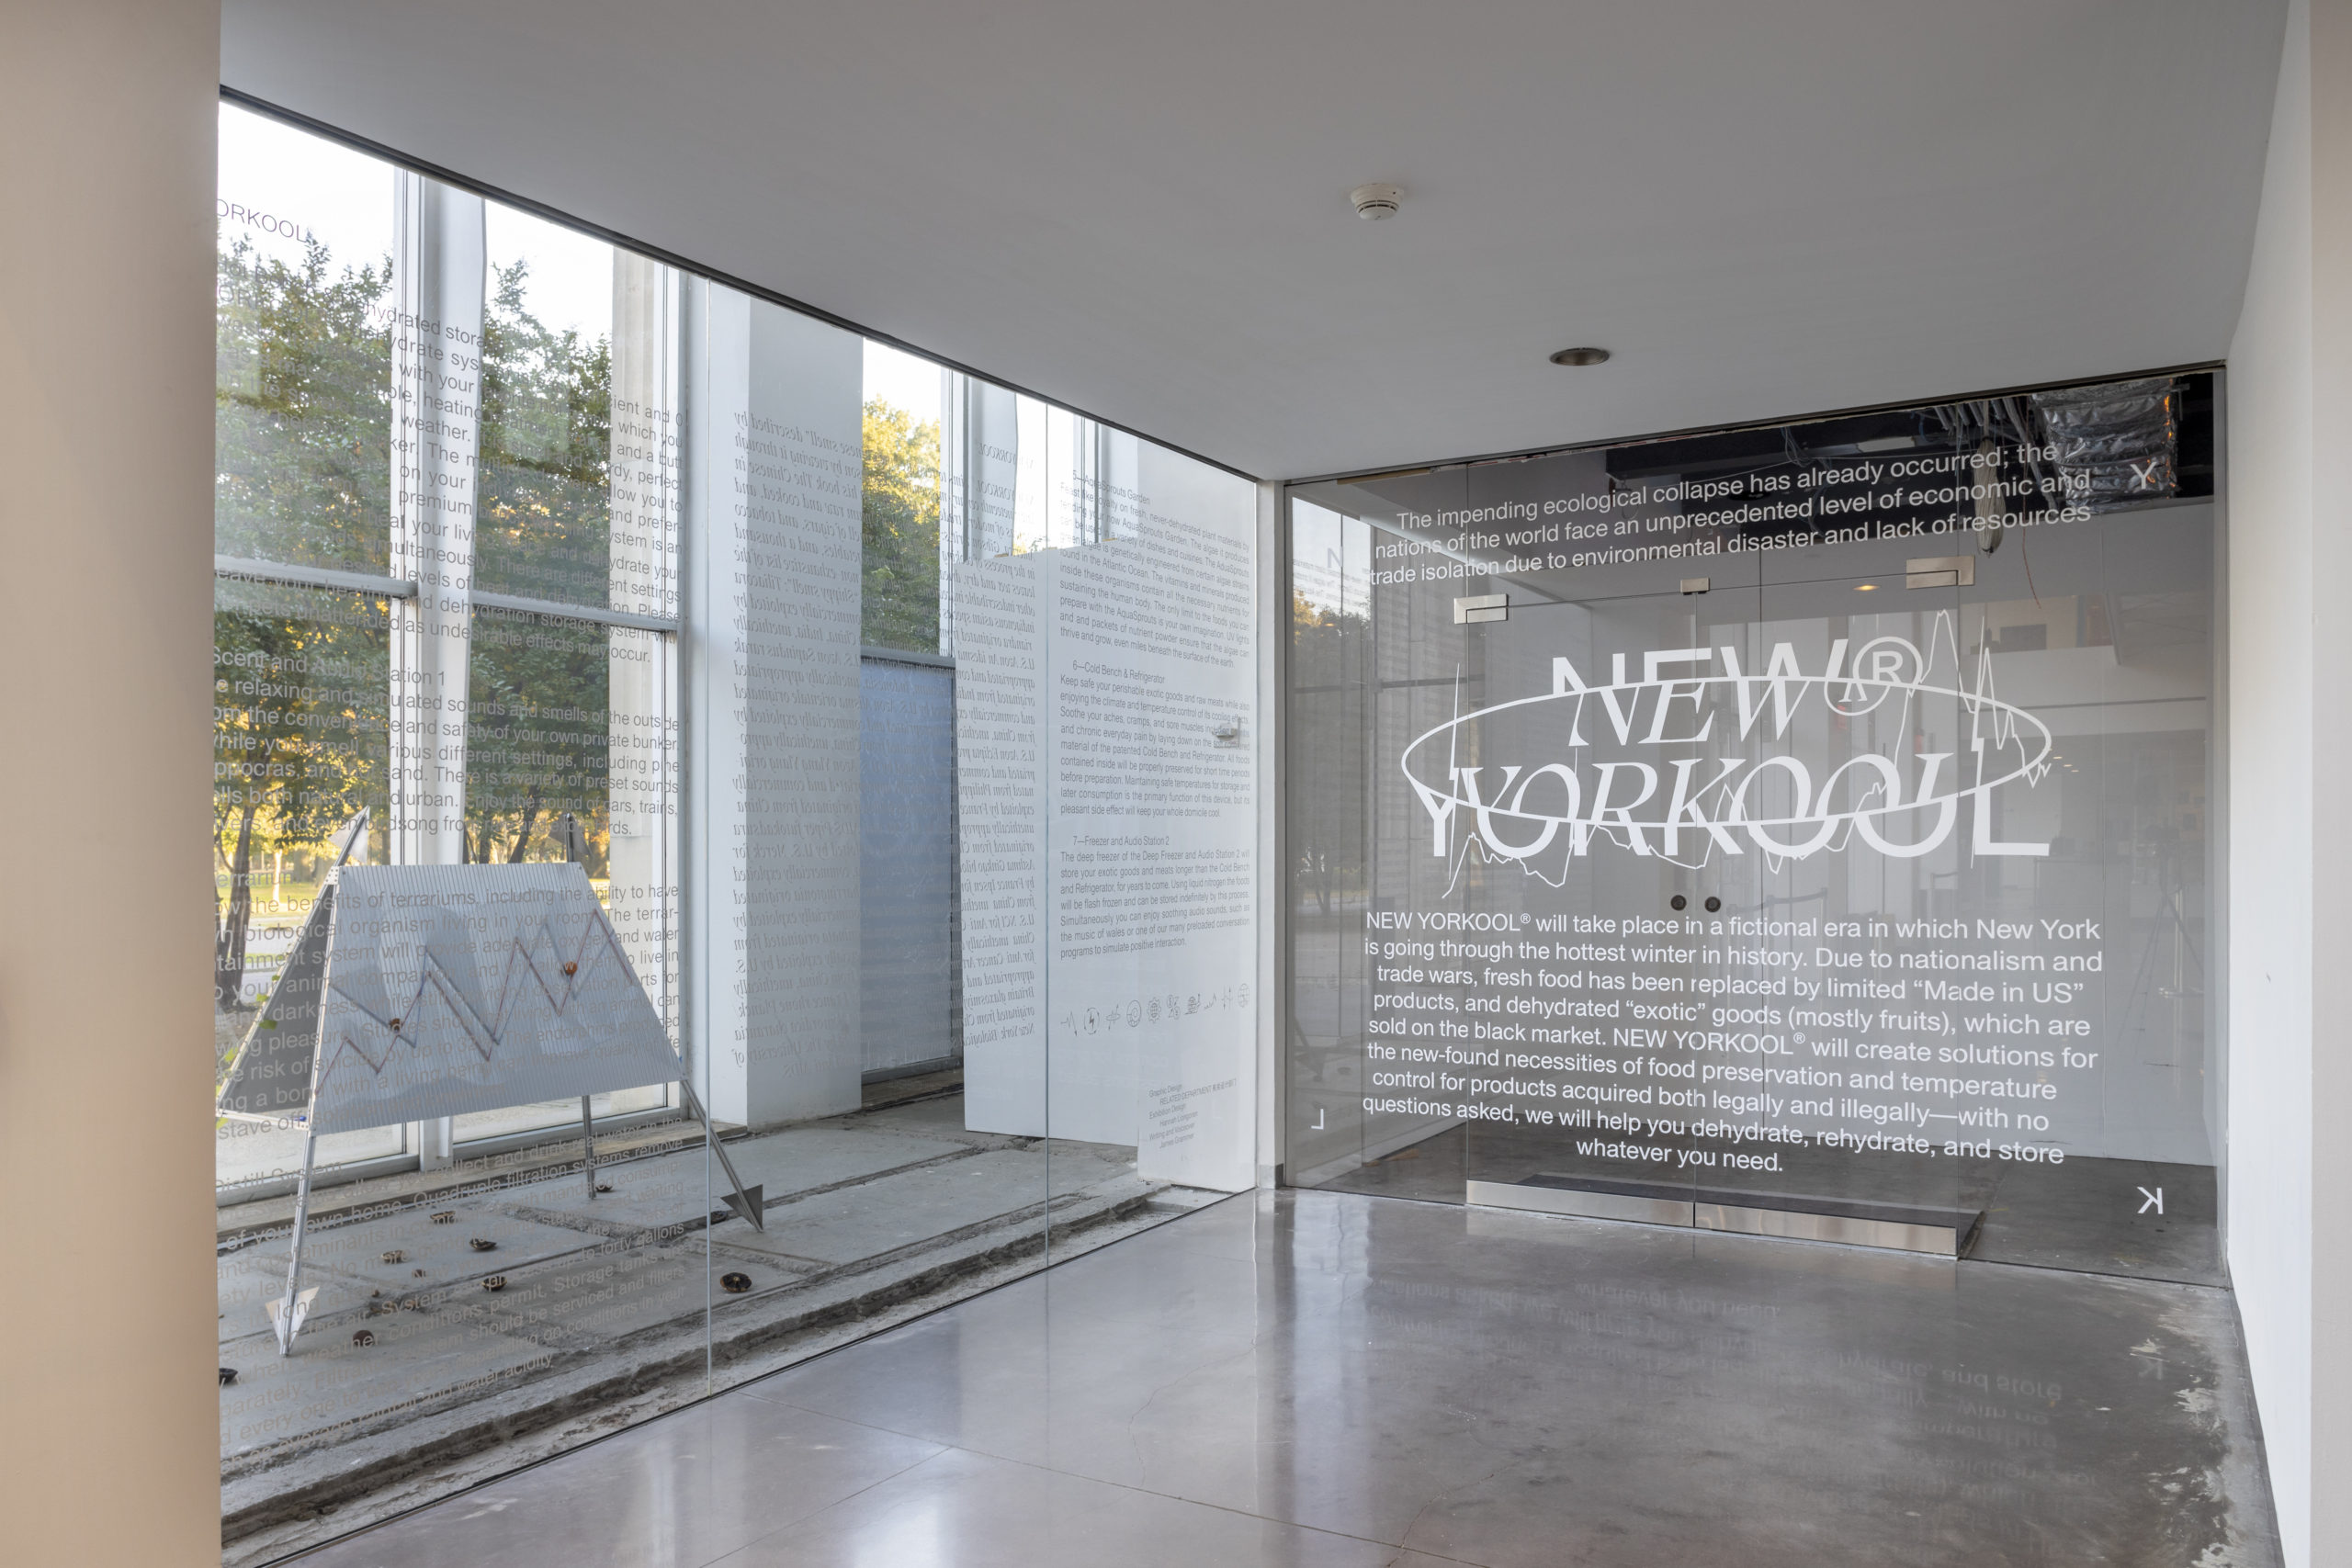 A view of two clear walls in an exhibition space that have with white, vinyl text. The longer wall on the left has three columns of paragraphs stickered on. The wall adjacent, to the right, has the exhibition title “New Yorkool” distorted and arranged along an oval. Above and below the centered exhibition title is a show statement.